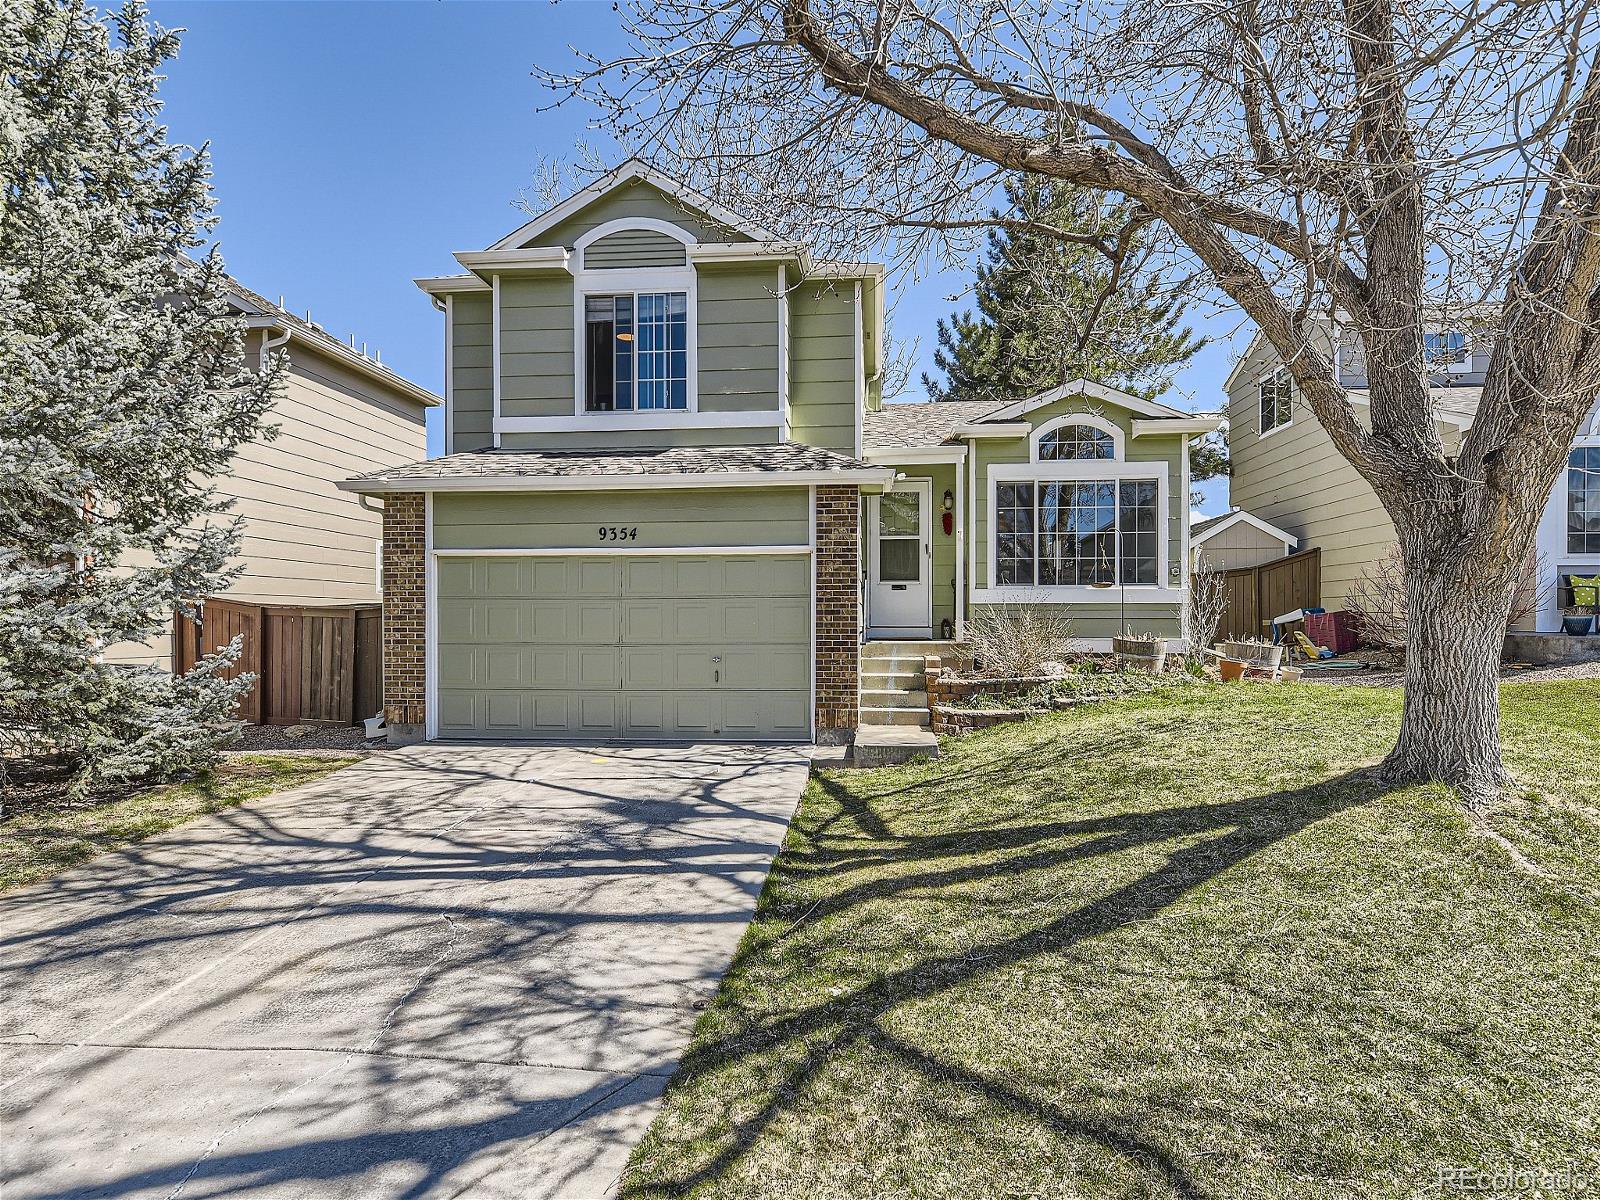 9354  Weeping Willow Place, highlands ranch MLS: 6986629 Beds: 3 Baths: 3 Price: $625,000